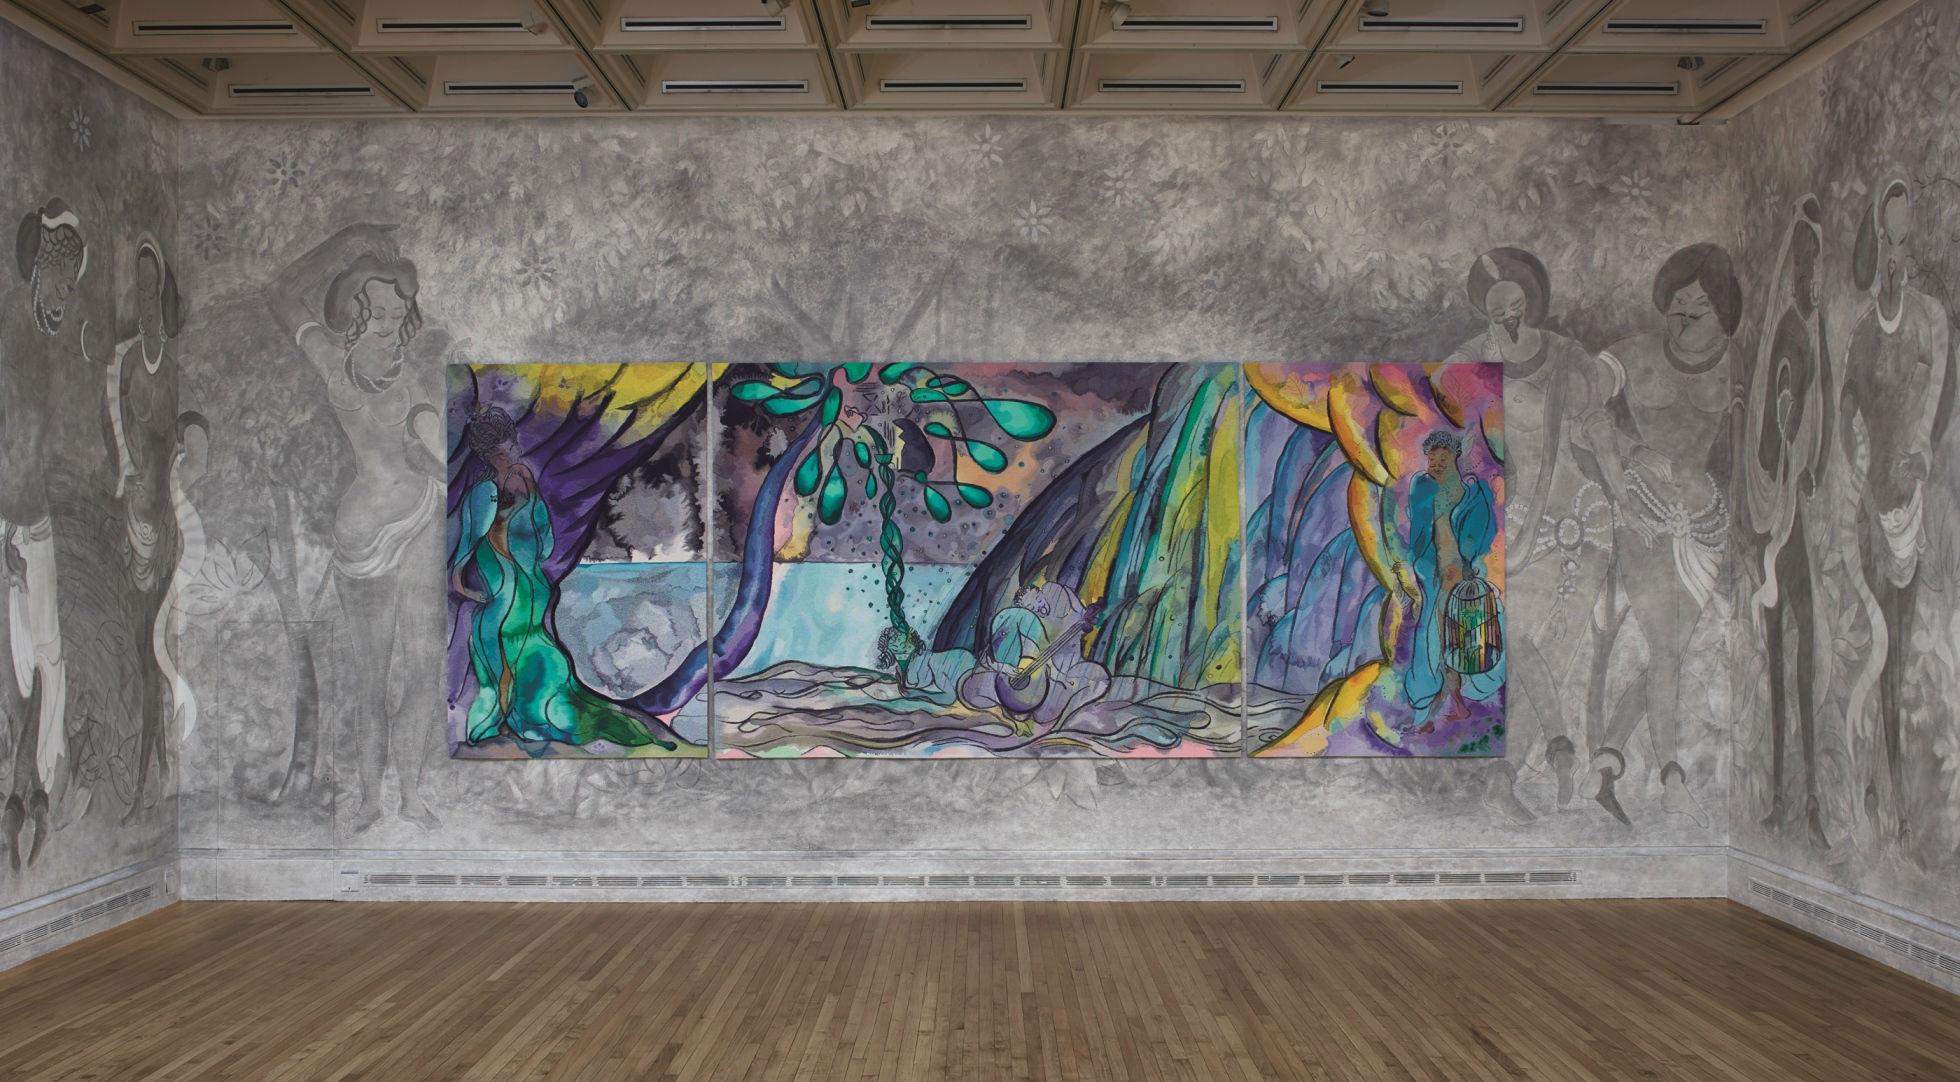 Installation view, 'Chris Ofili: Weaving Magic' at the National Gallery